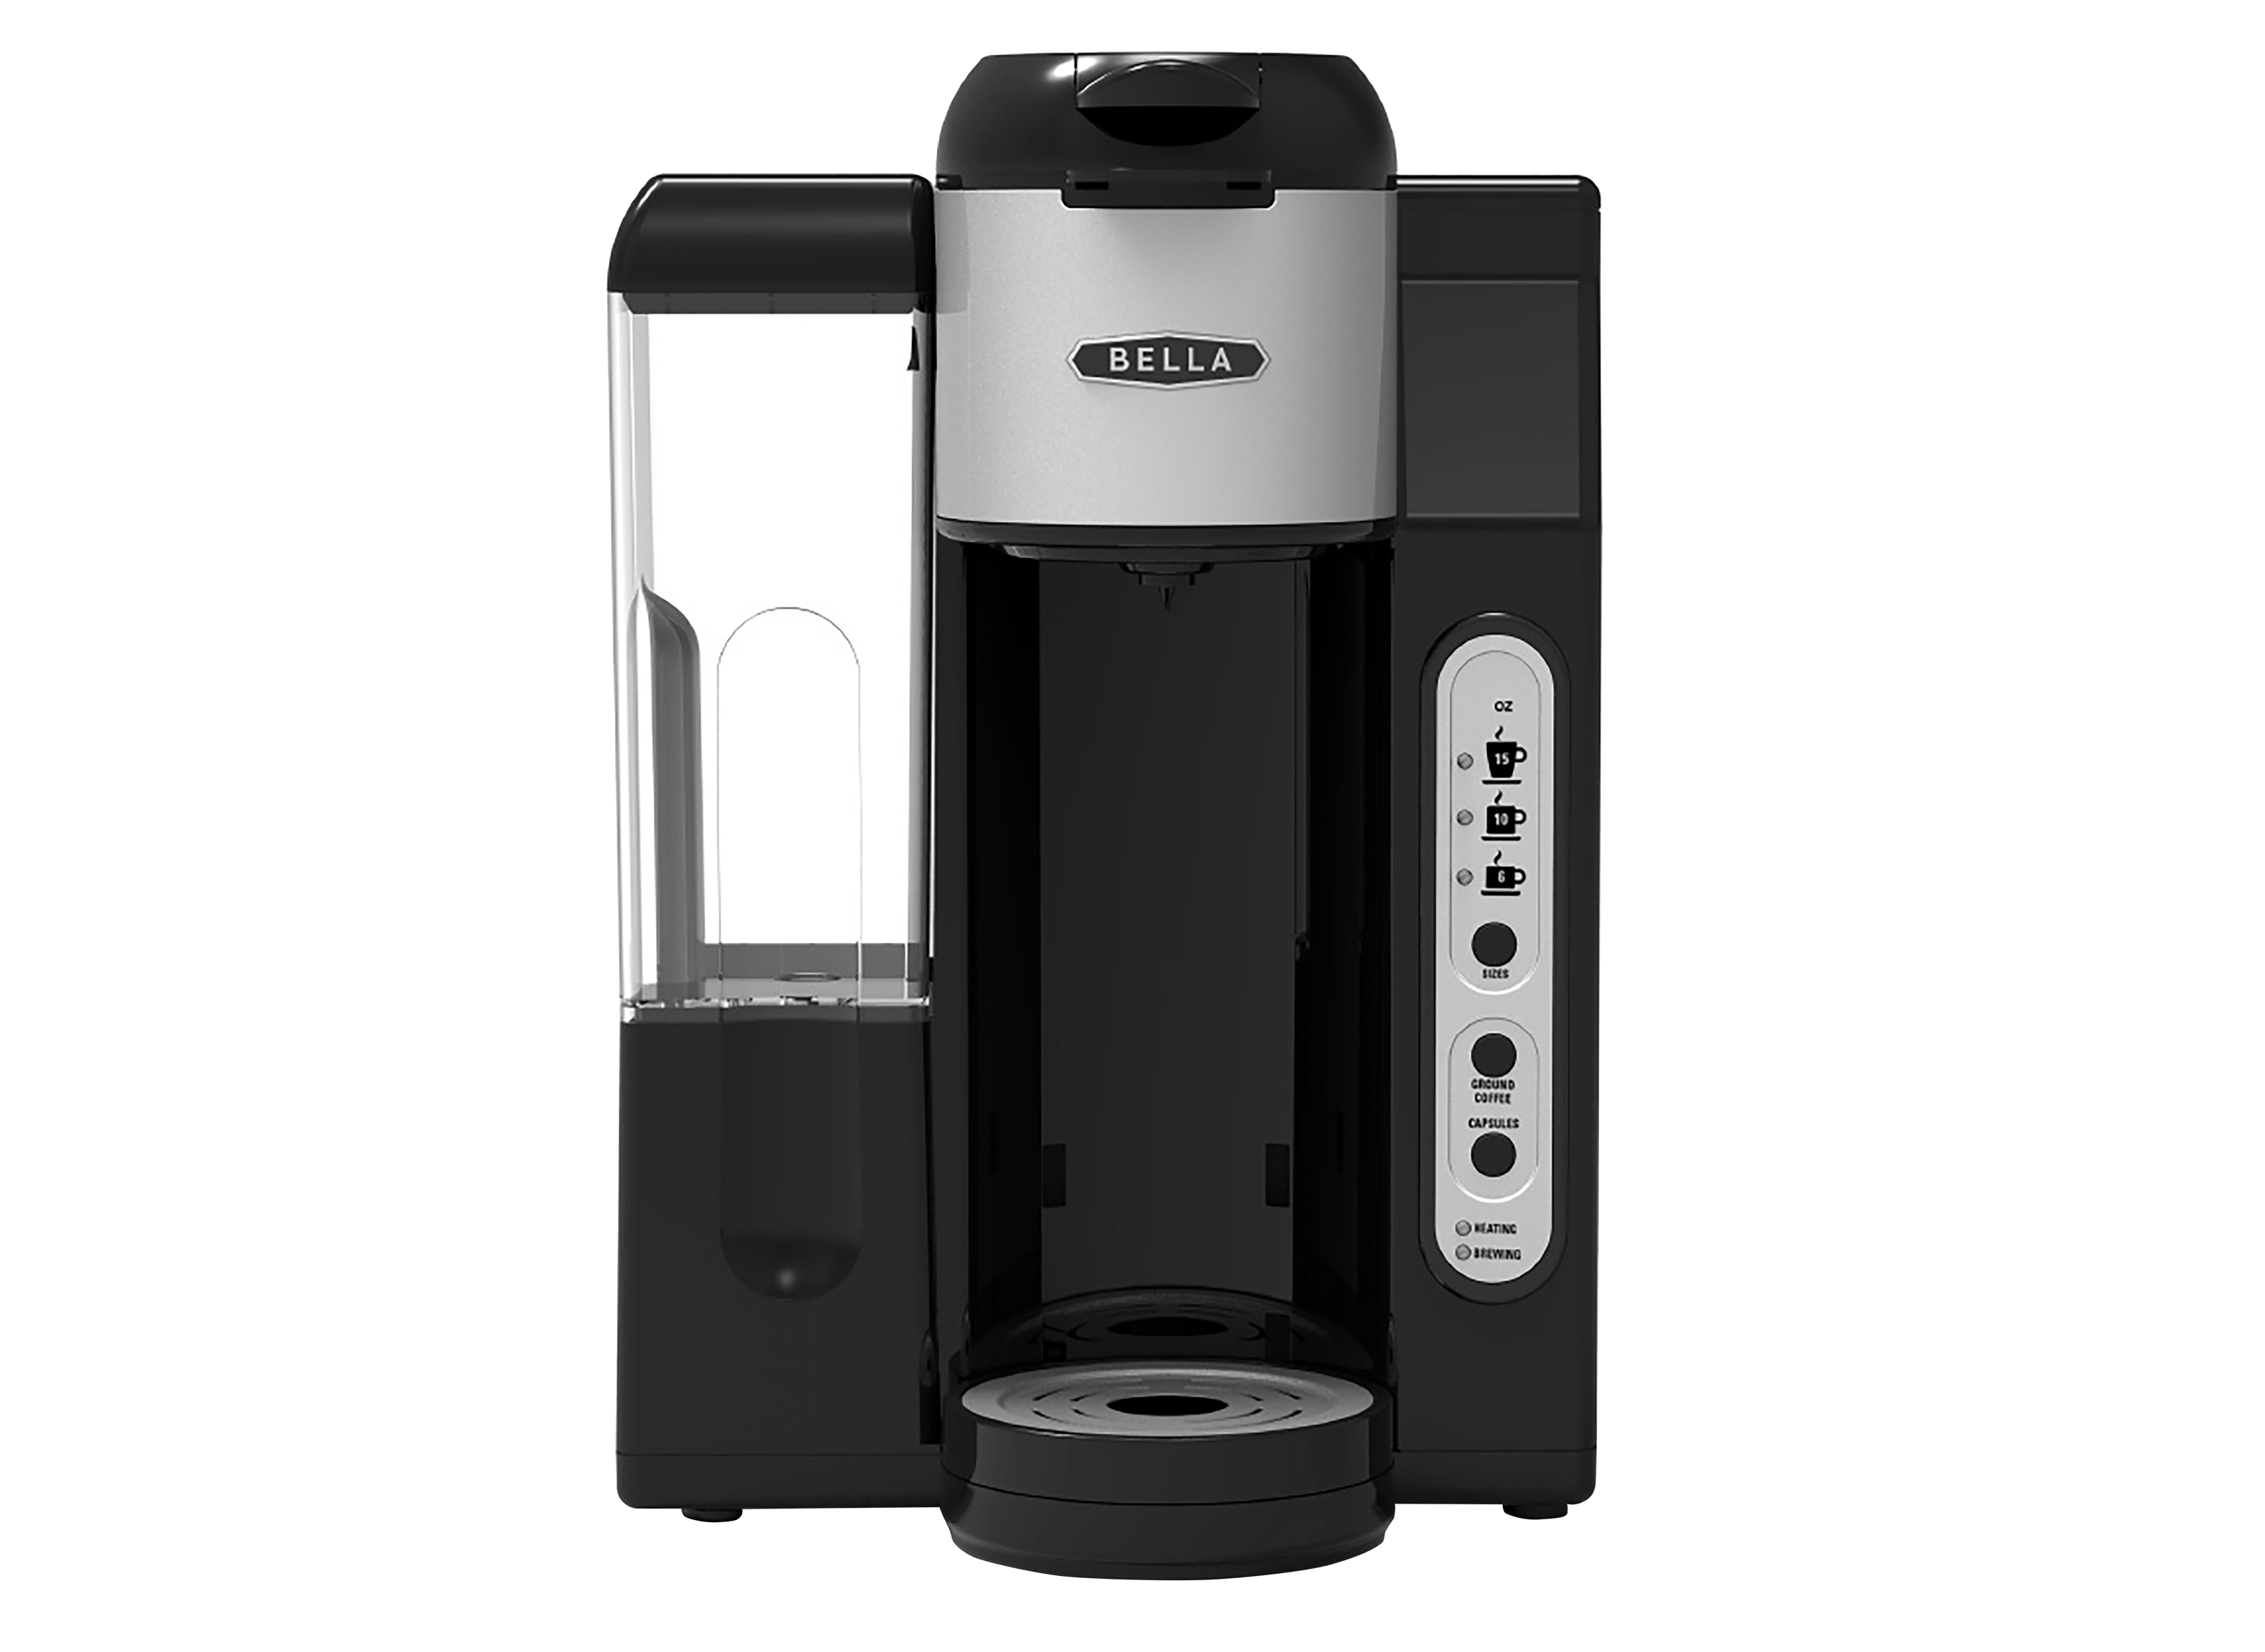 https://crdms.images.consumerreports.org/prod/products/cr/models/395539-drip-coffee-makers-bella-single-serve-with-water-tank-bla14585-61034.png